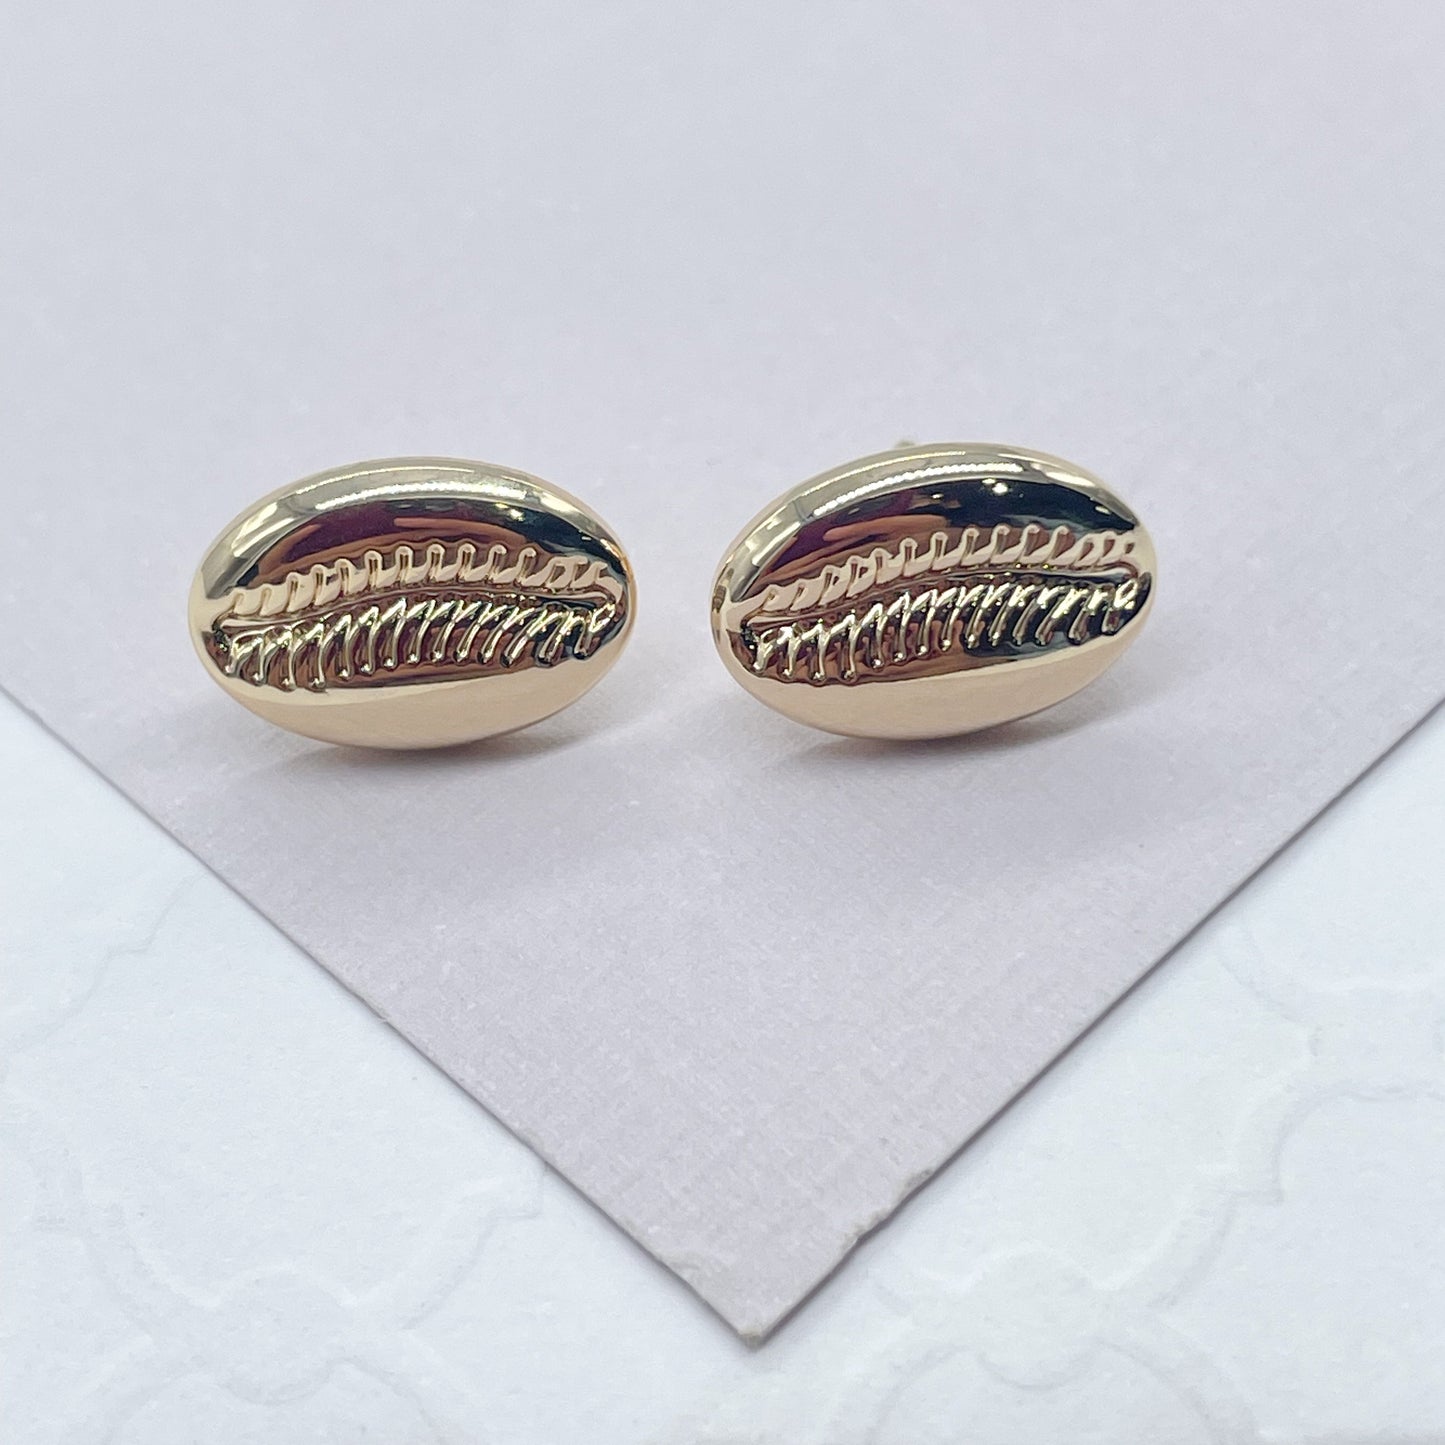 18k Gold Layered Plain Conch Stud Earring